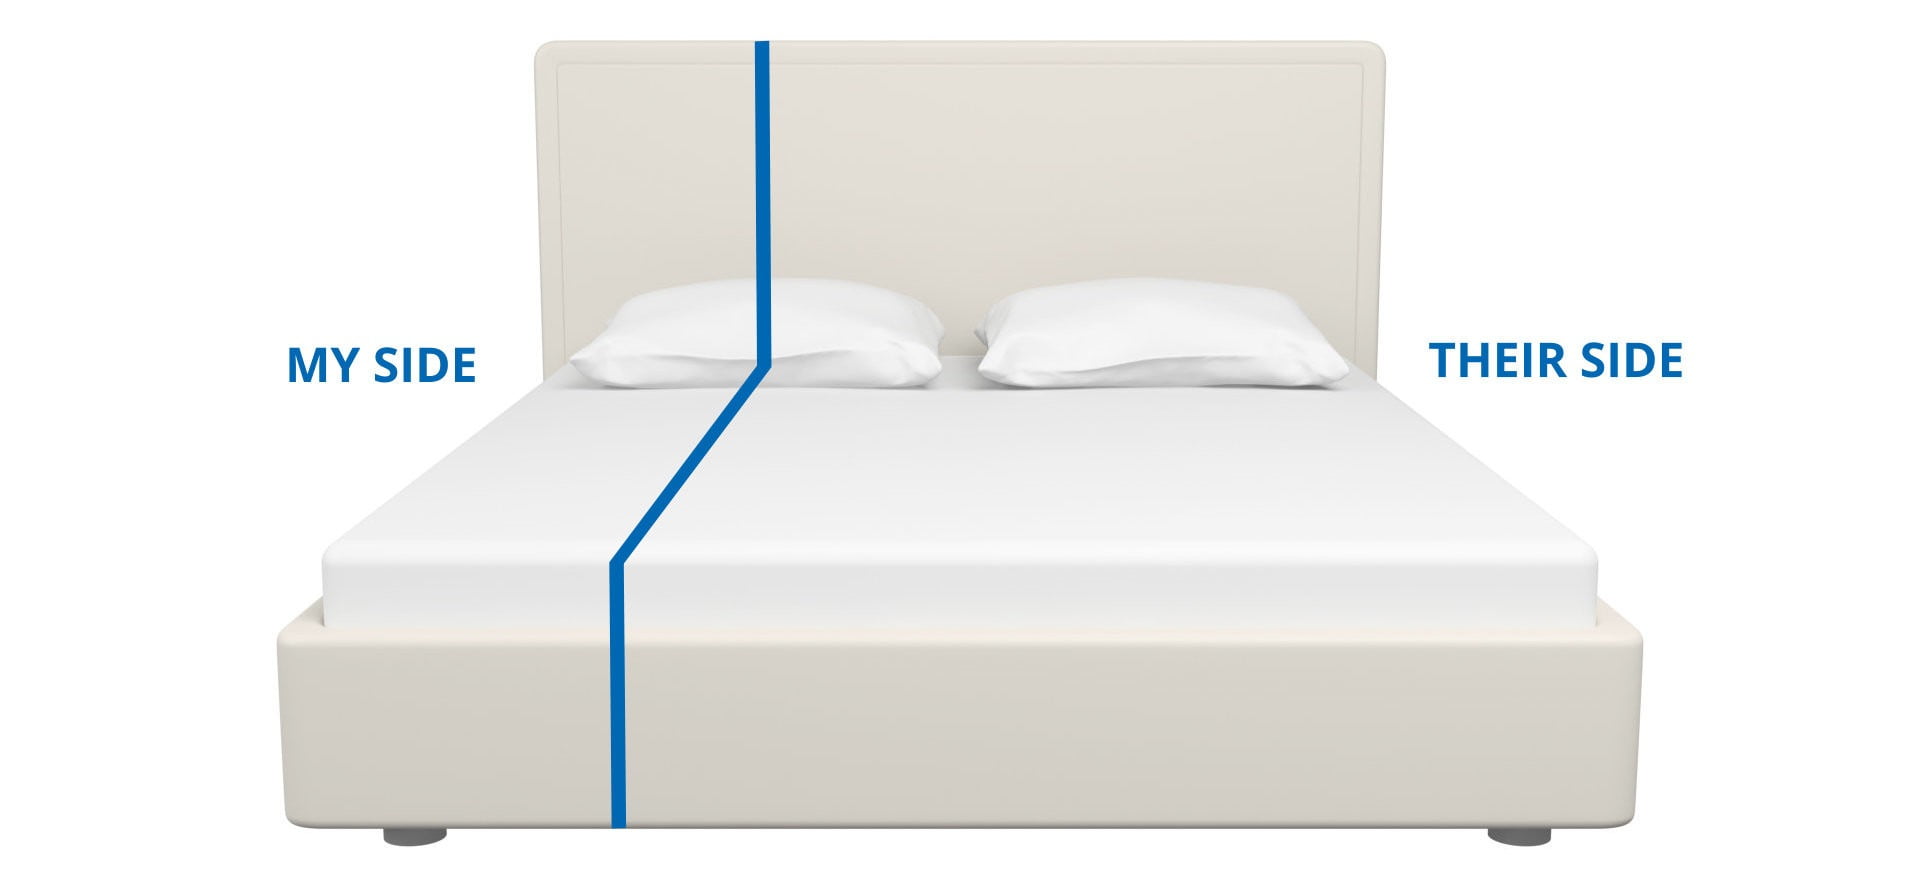 Bed Sizes Uk And Mattress Size, Is A Queen Size Bed Double Uk